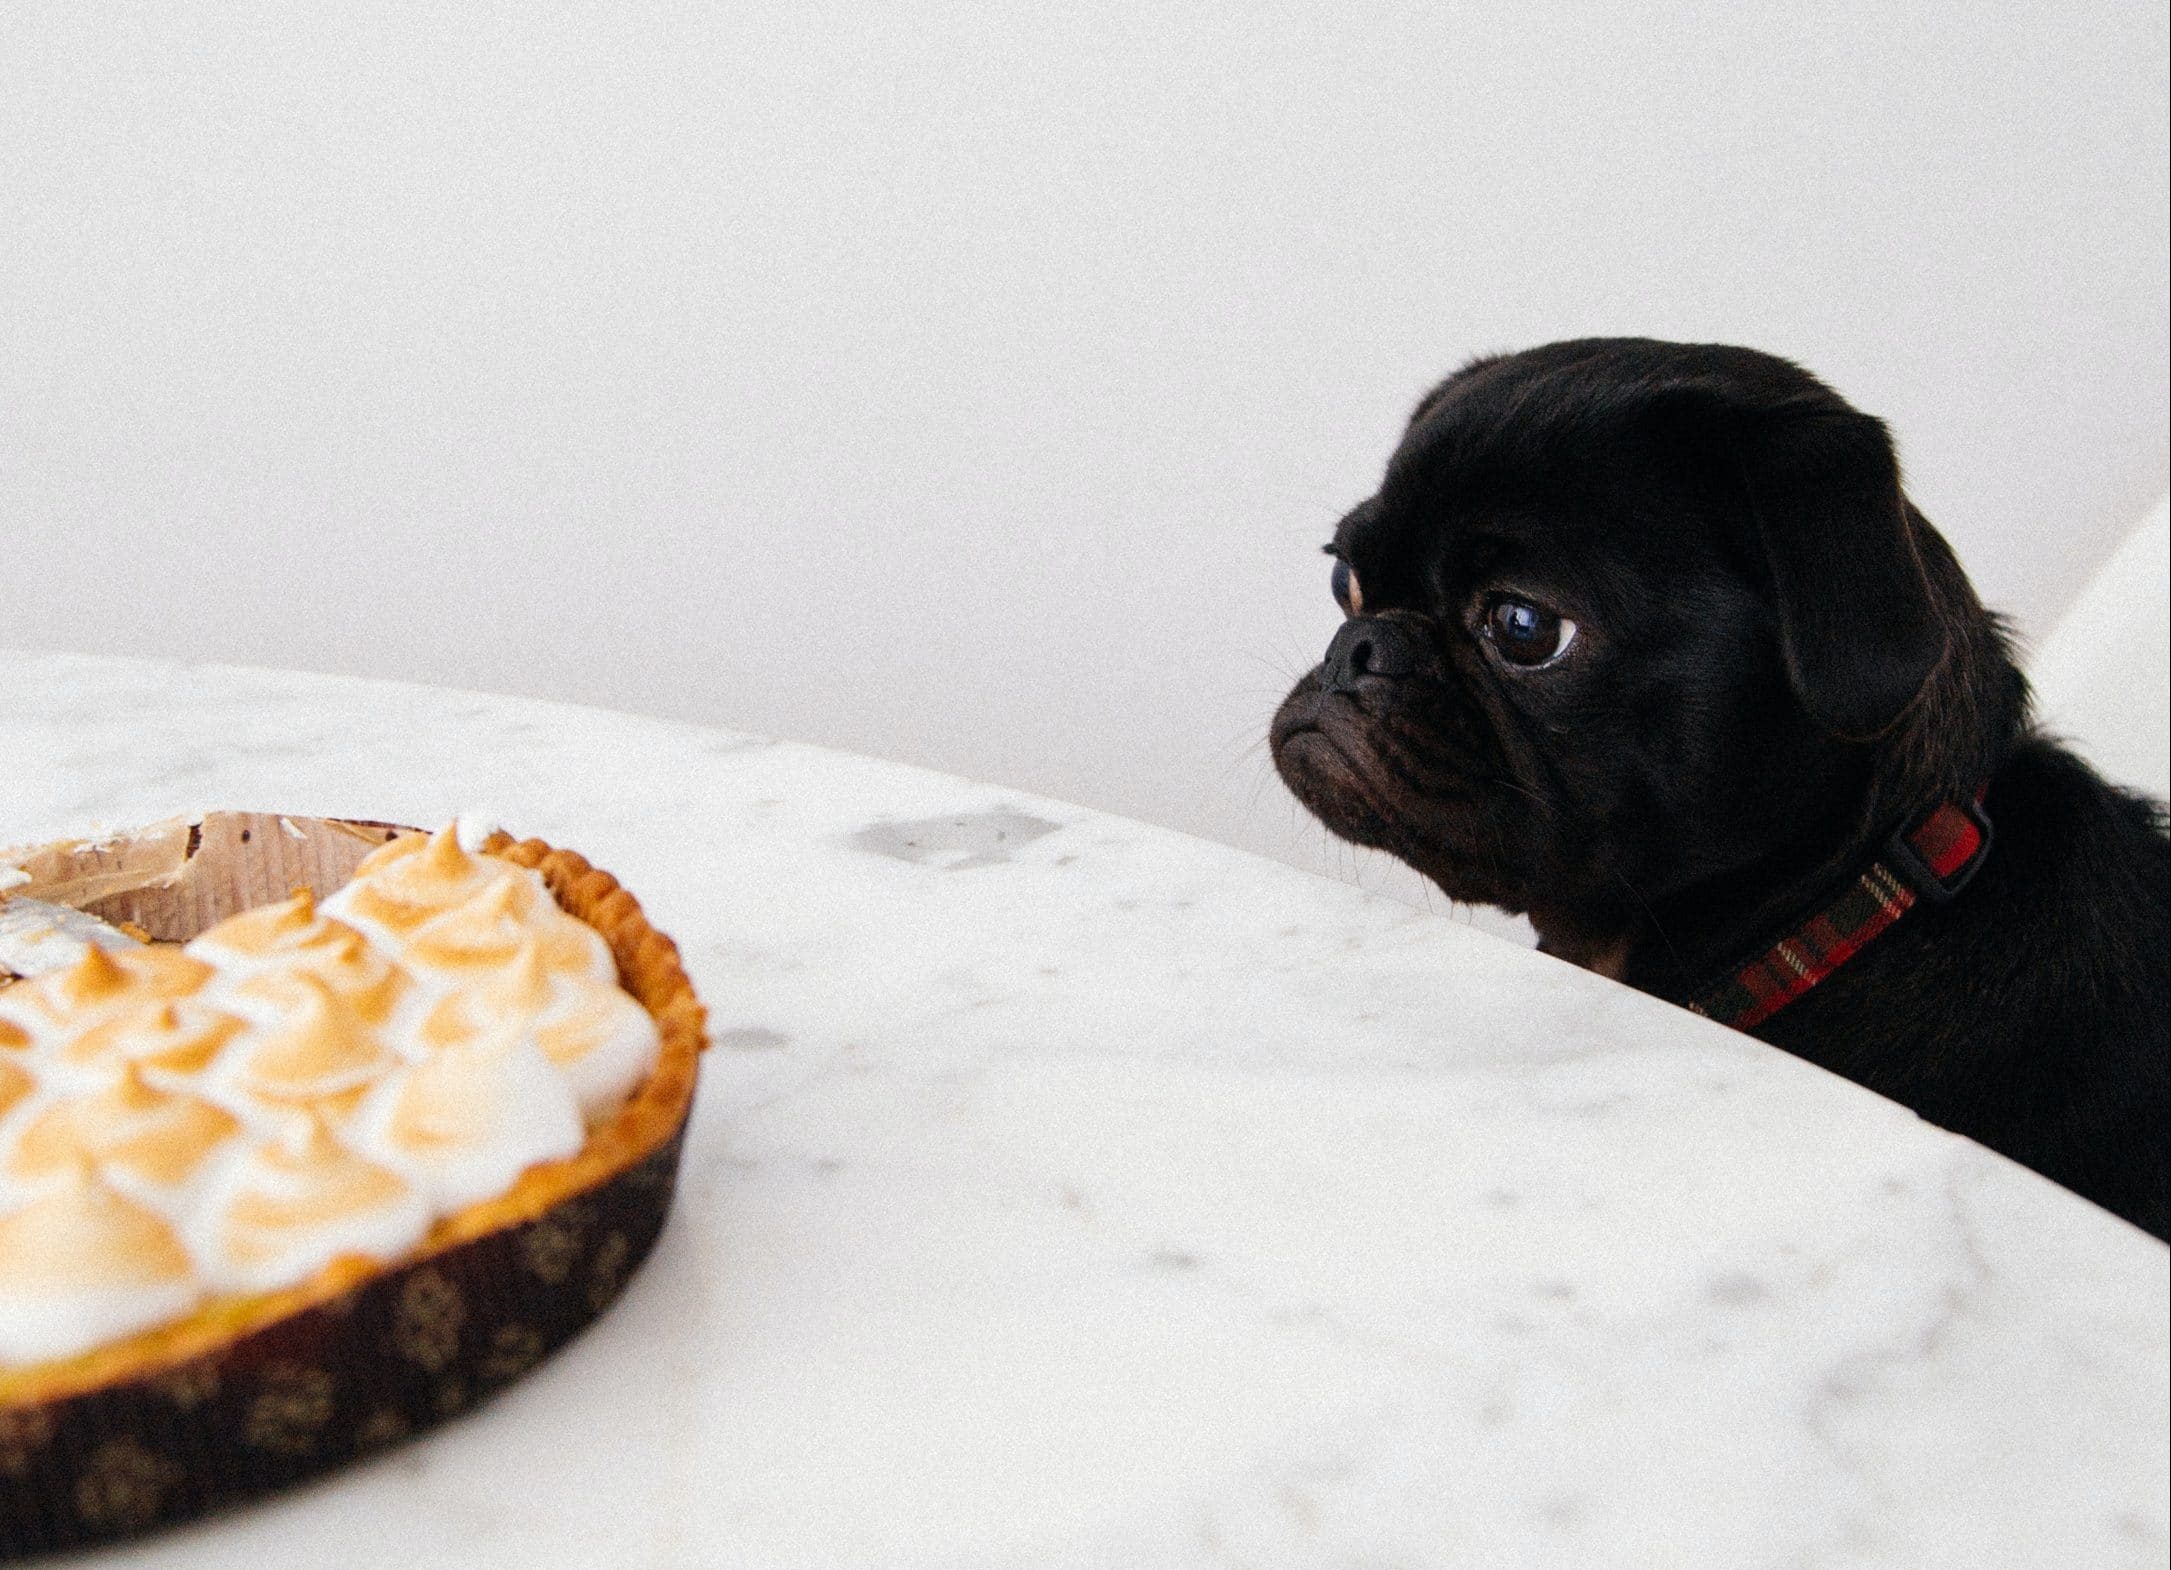 A dog and a pie